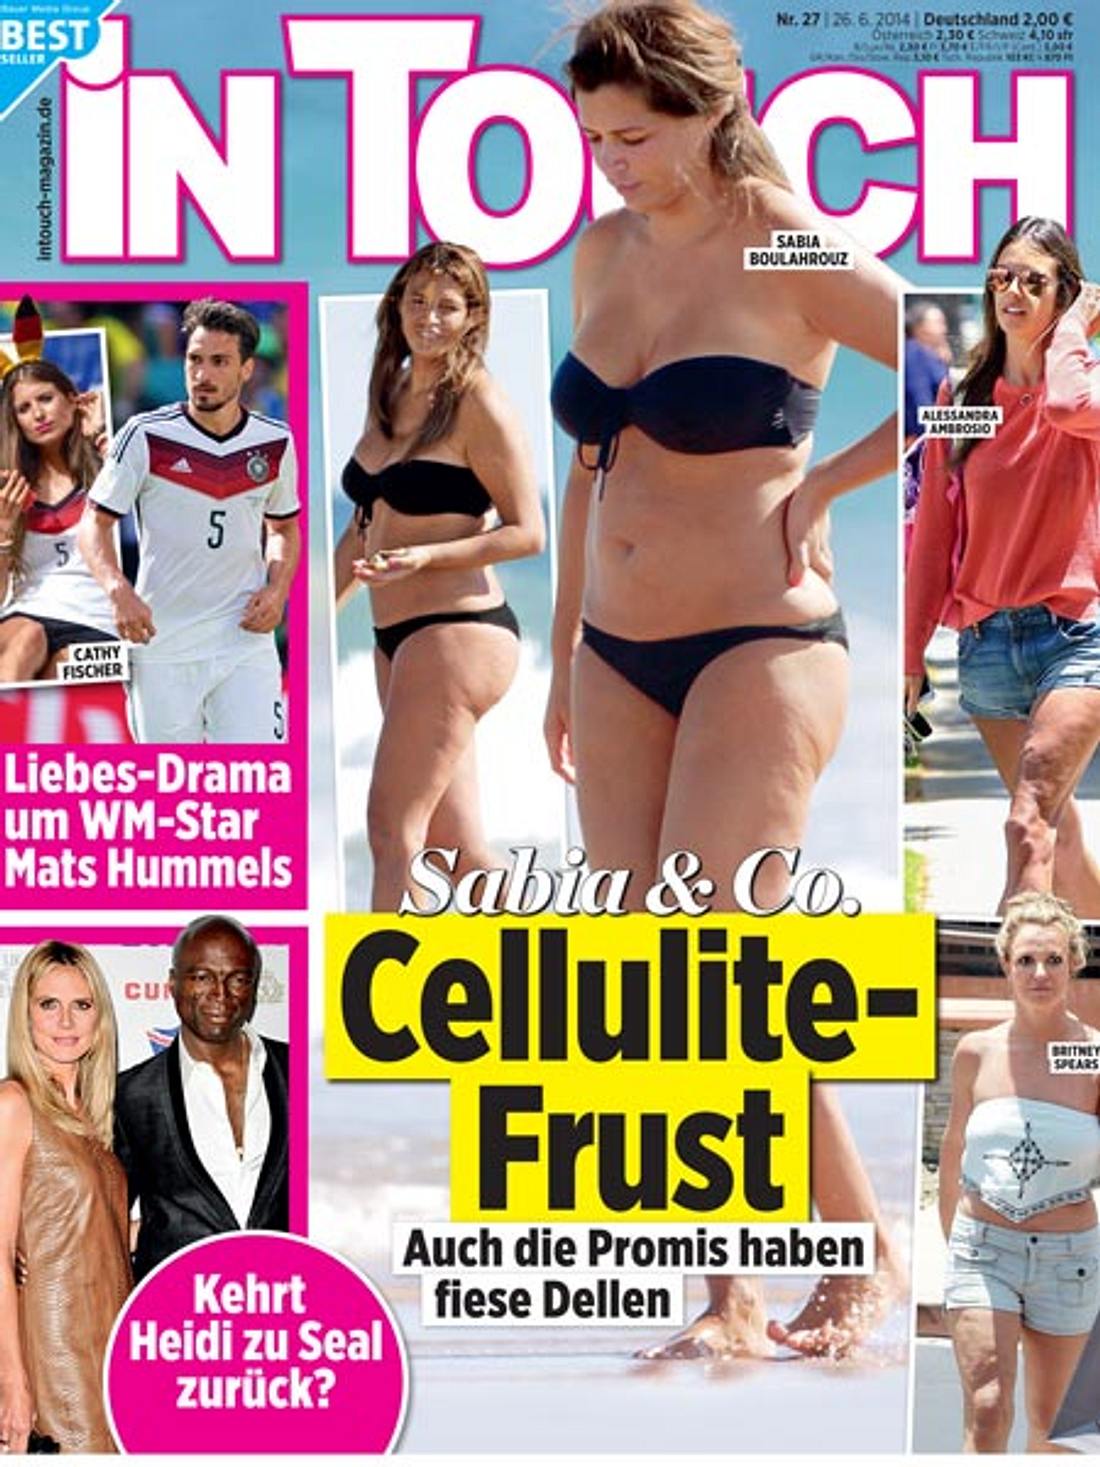 InTouch: Cellulite-Frust bei Sabia &amp; Co.